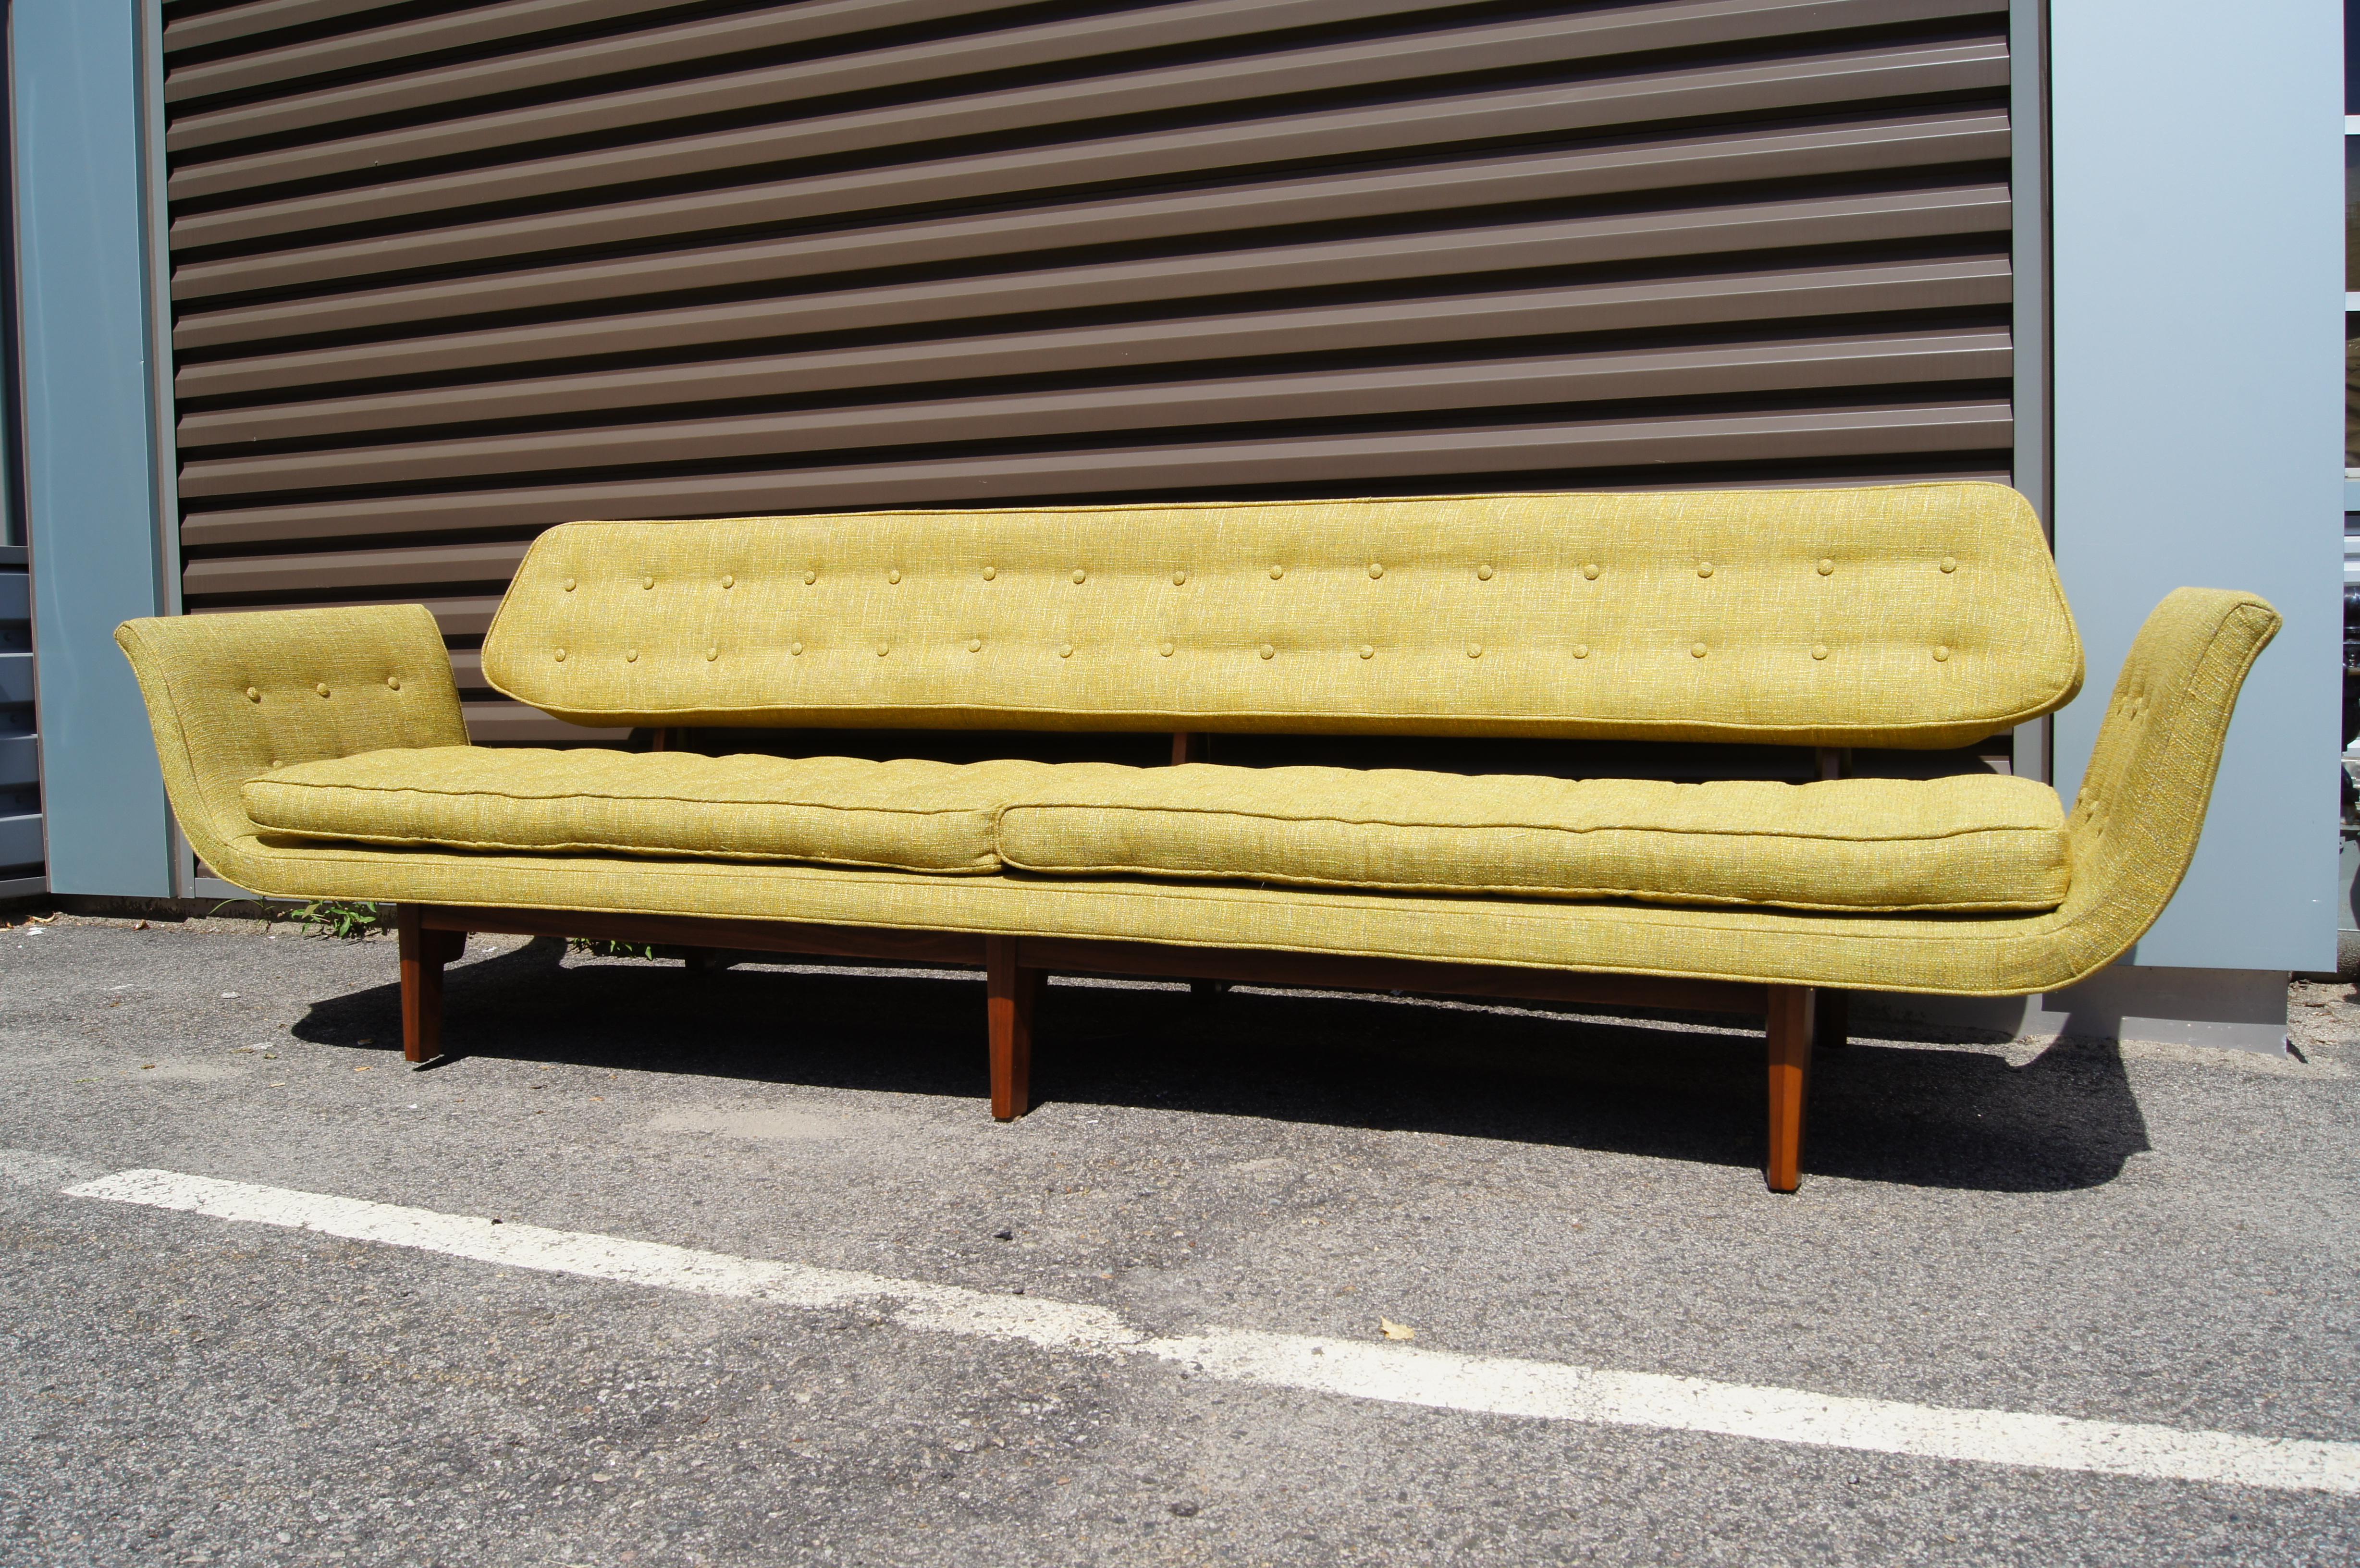 Designed as part of Dunbar's Janus Collection in 1957, La Gondola, model 5719, is one of Edward Wormley's most coveted sofas. This is the longer version with six legs. The solid walnut frame, upholstered in Knoll's Diva textile (in Green Tea),